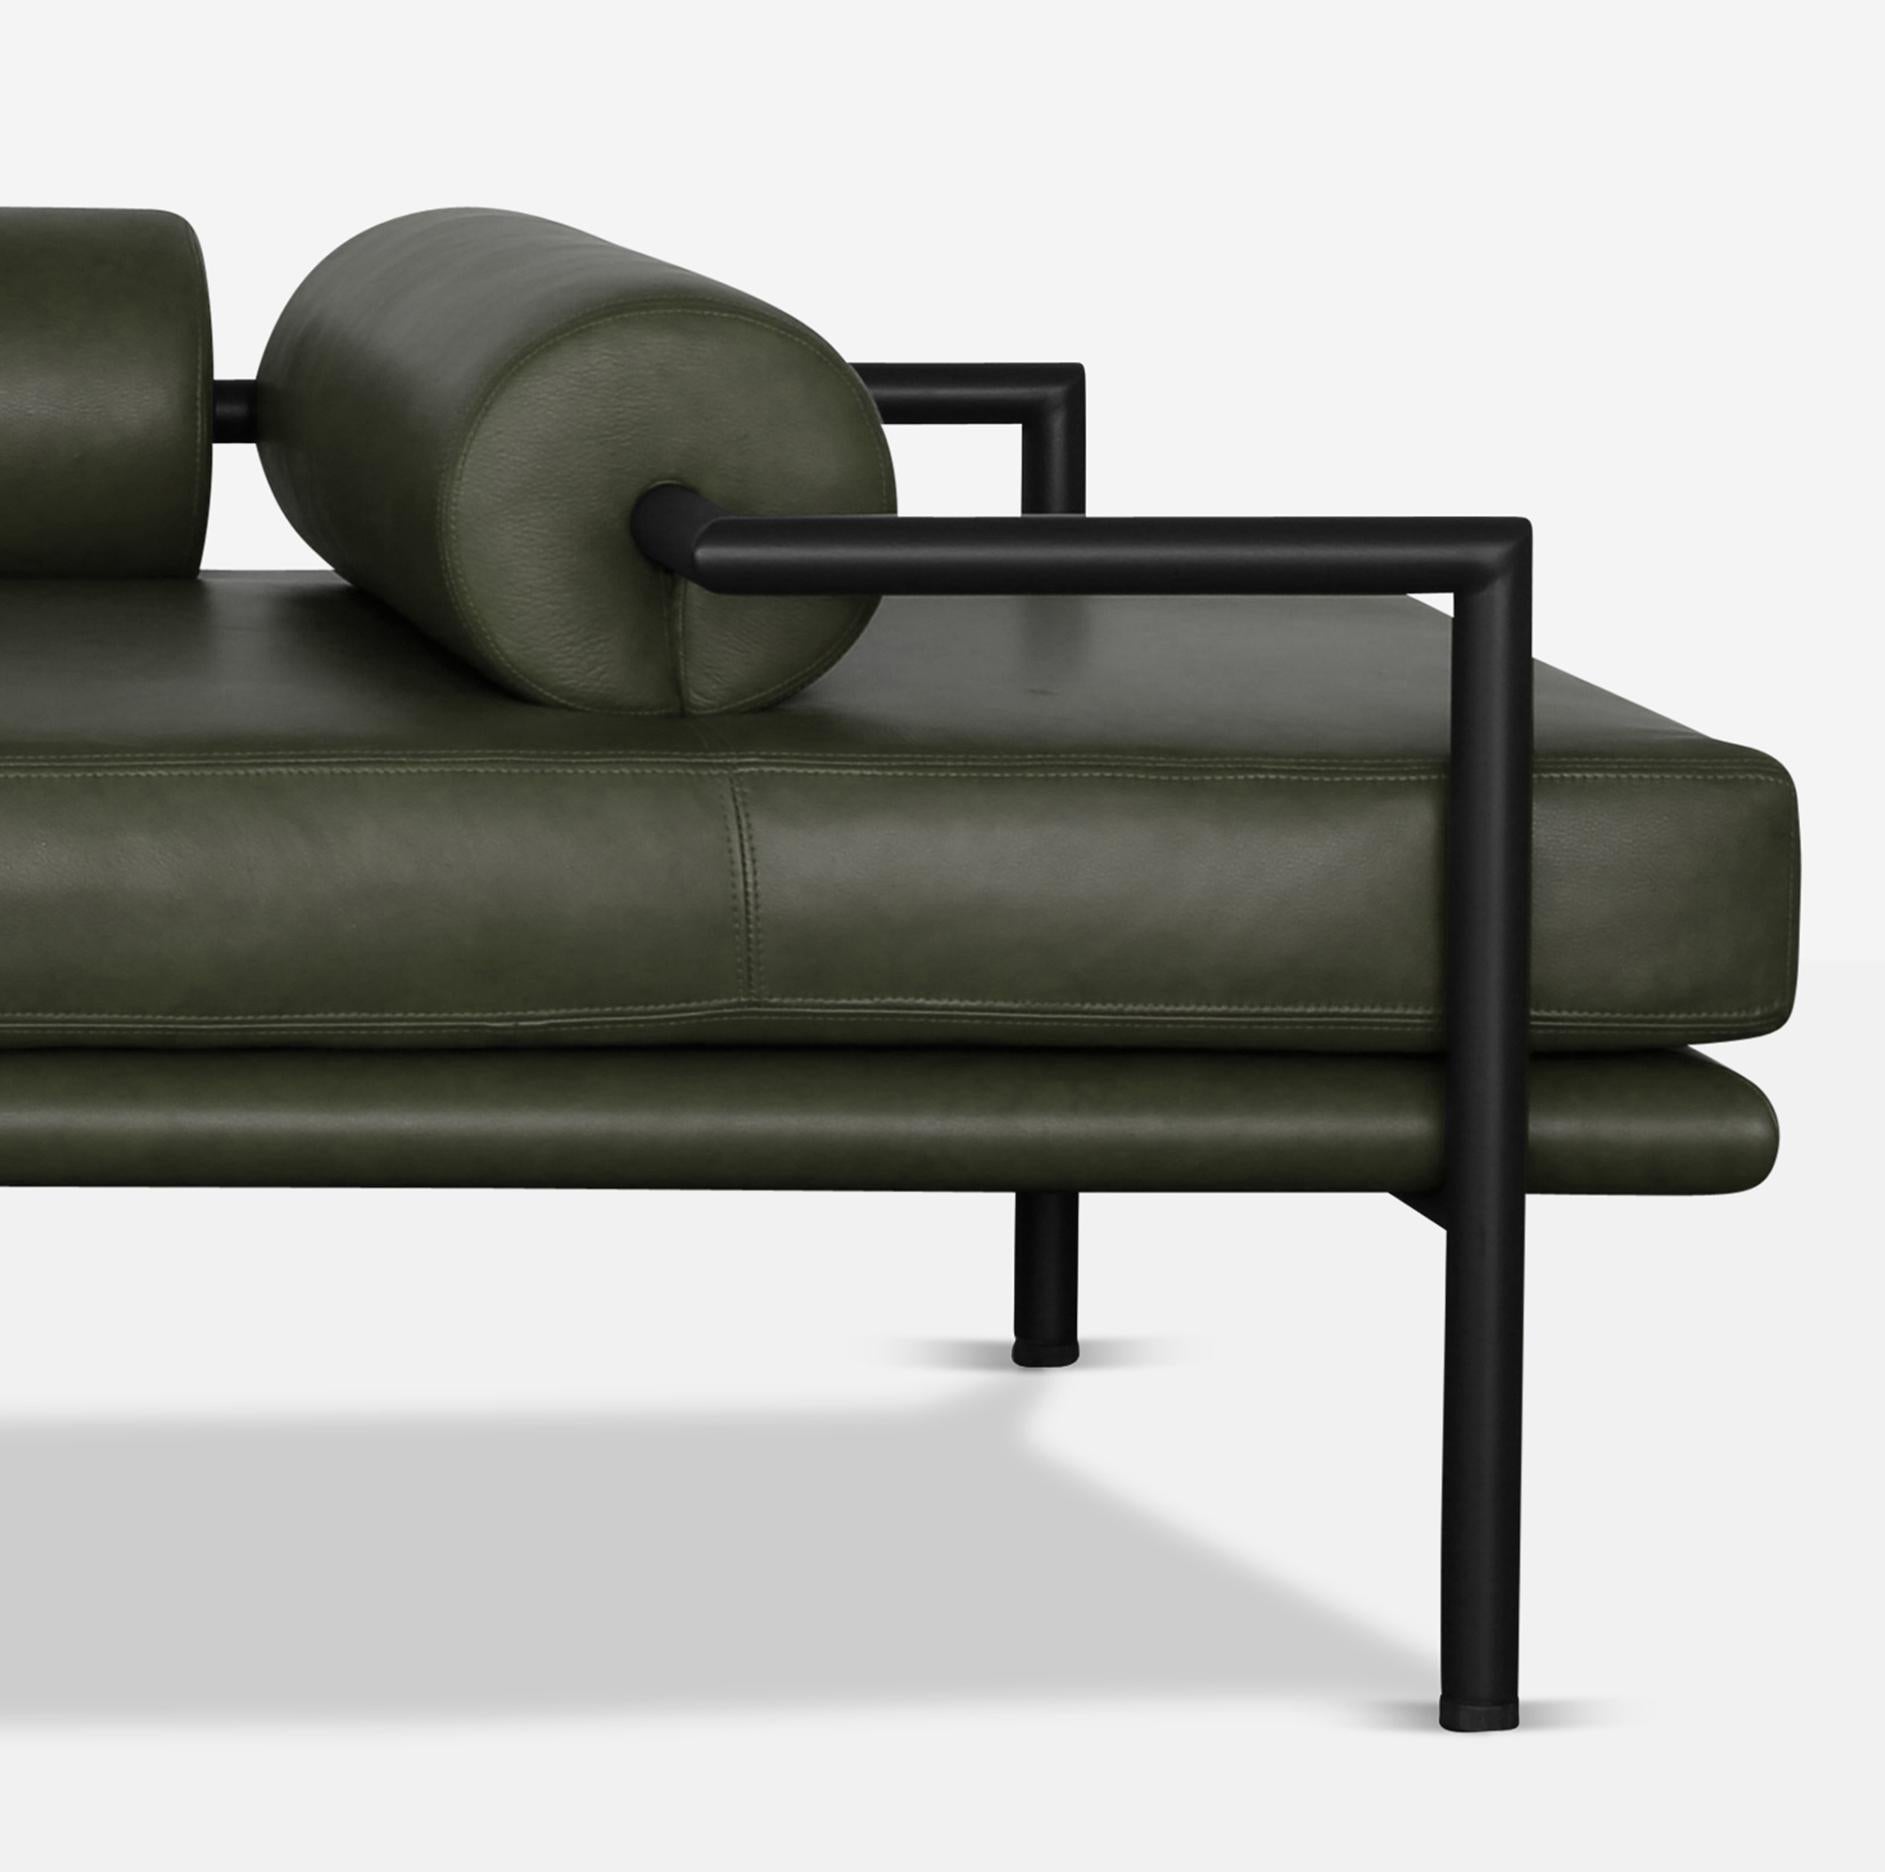 Inspired by the architecture of Luis Barragán, the Dorcia Daybed by Jorge Arturo Ibarra is a unique piece that focuses on form and function. The bolsters serve as head rests, arm rests or low back rests that divide the daybed into central seating